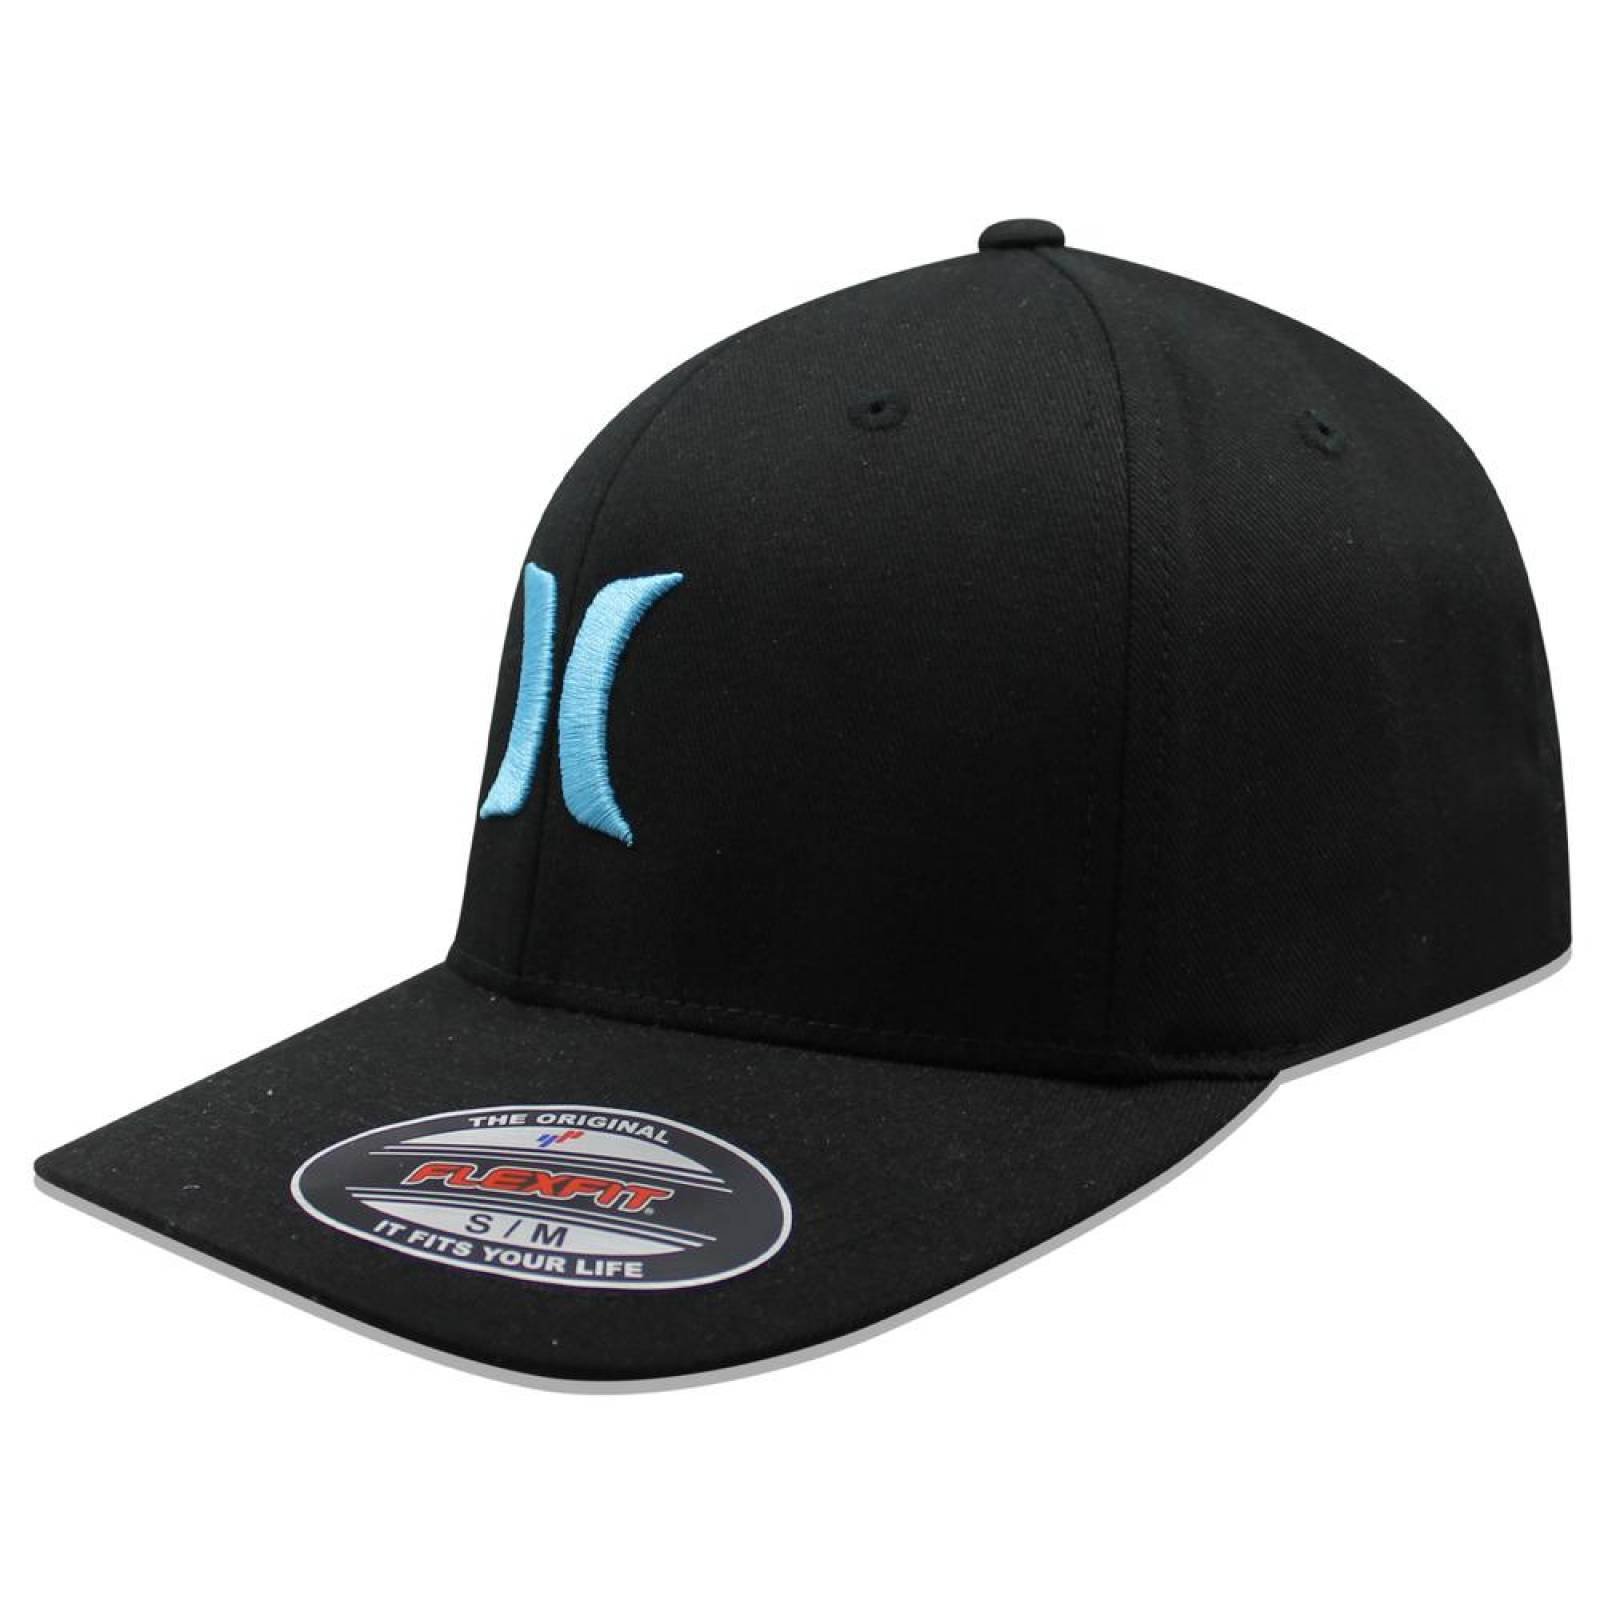 Gorra Hurley Flex Fit One And Only Negro 